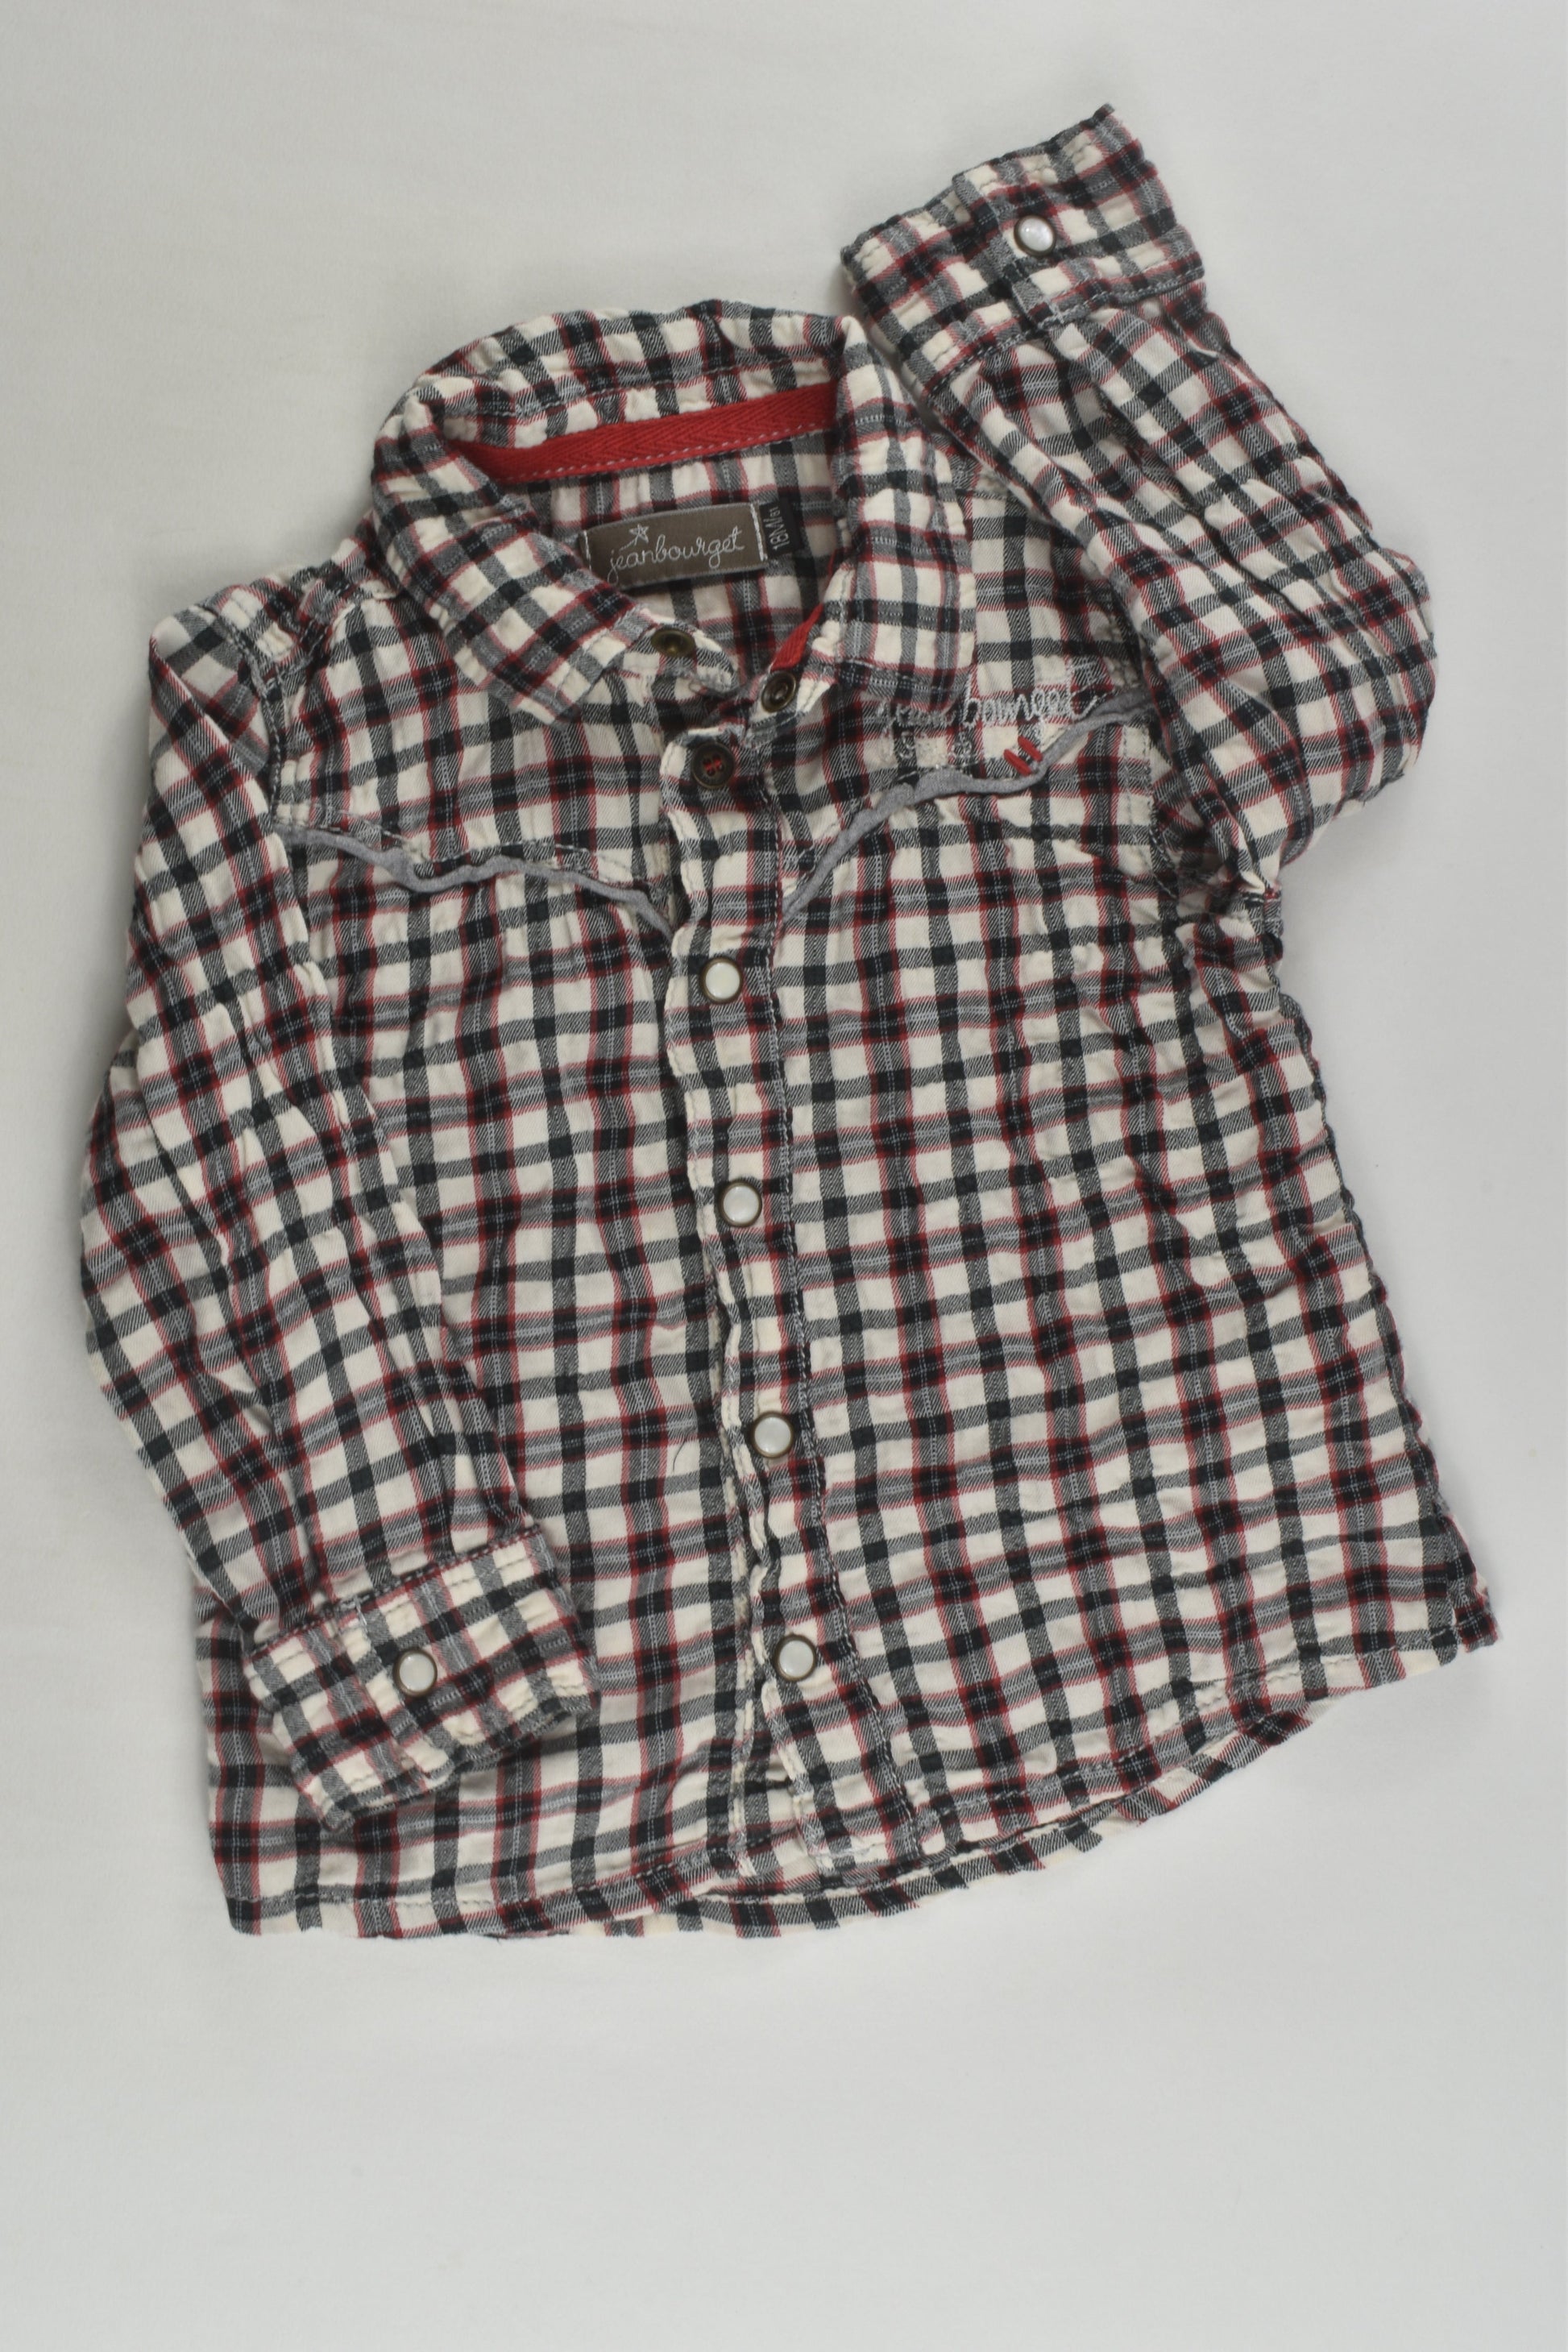 Jean Bourget Size 1 (18 months) Checked Shirt